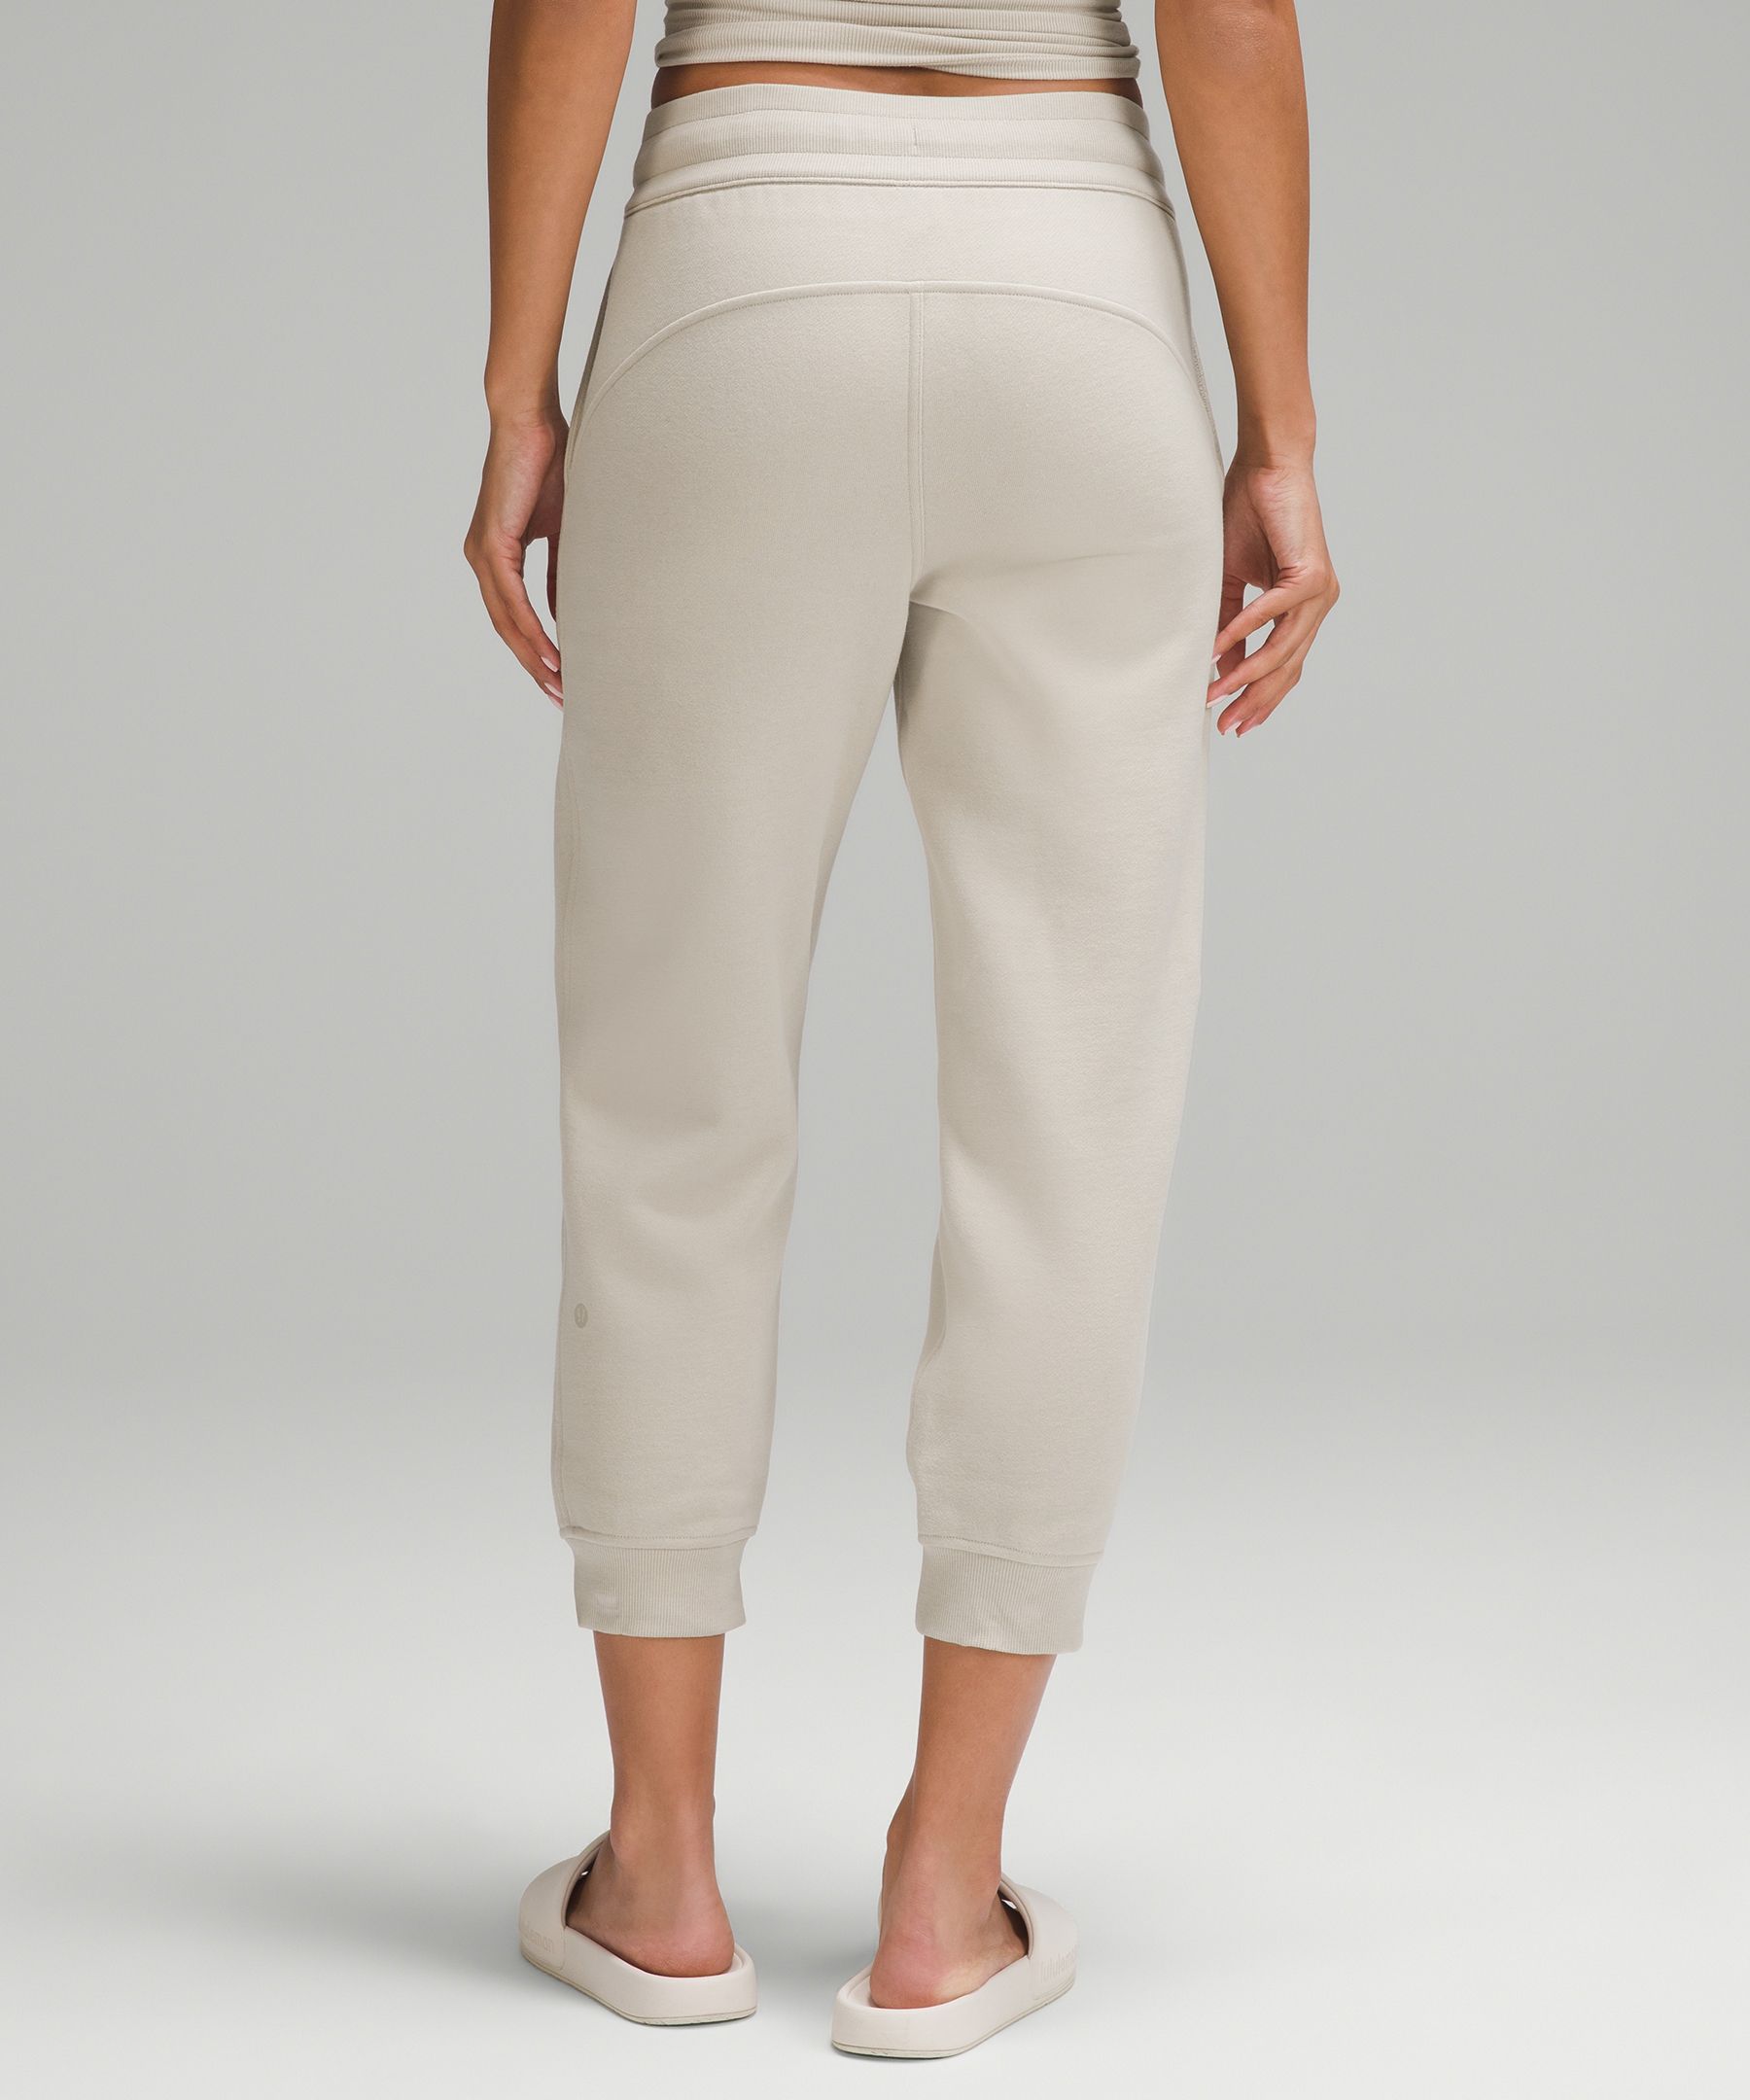 Lululemon Women's Scuba High Rise Jogger Size 20 in Pink - $105 New With  Tags - From Tomi